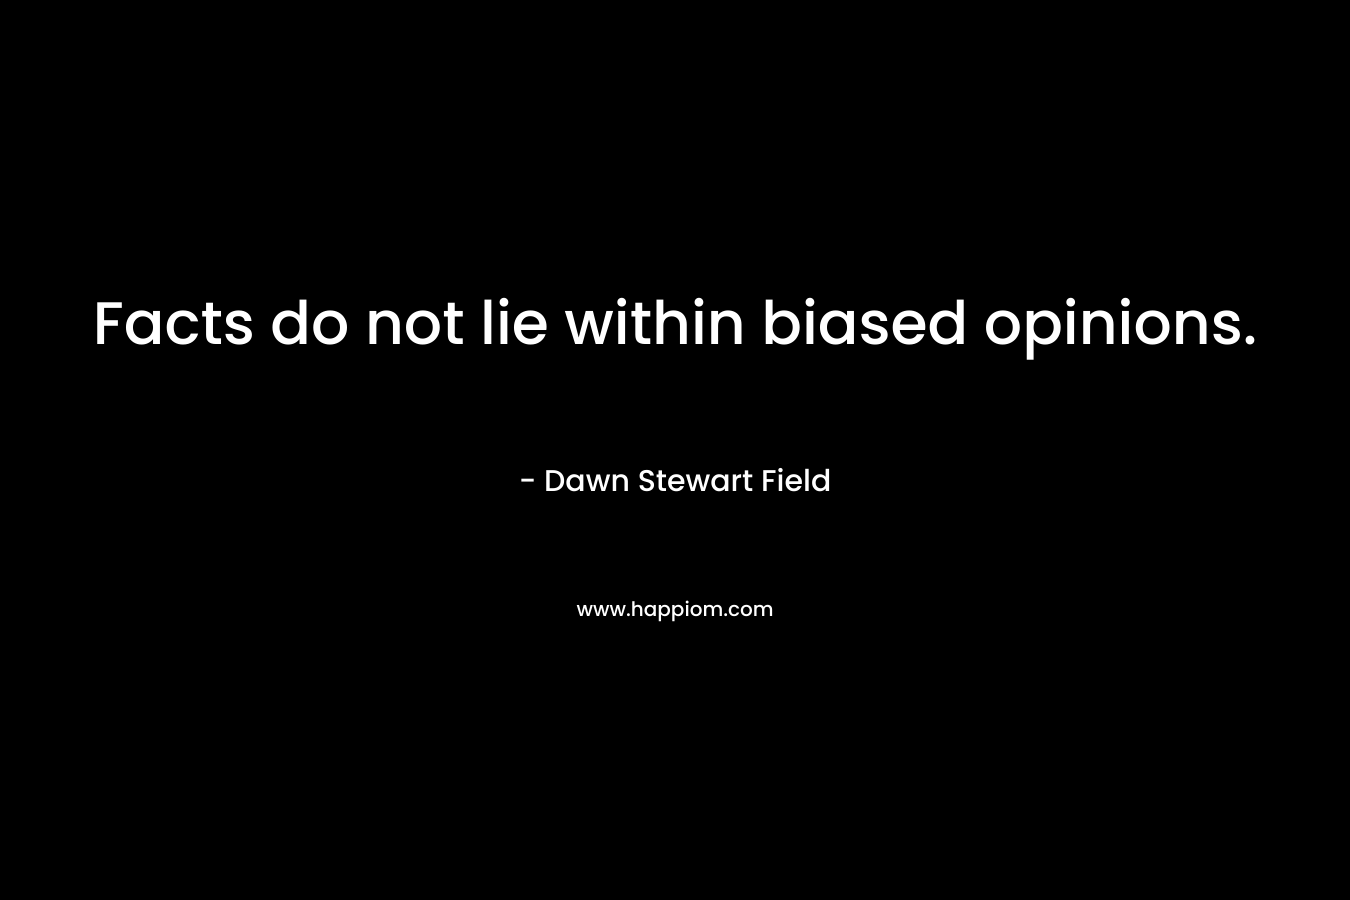 Facts do not lie within biased opinions.